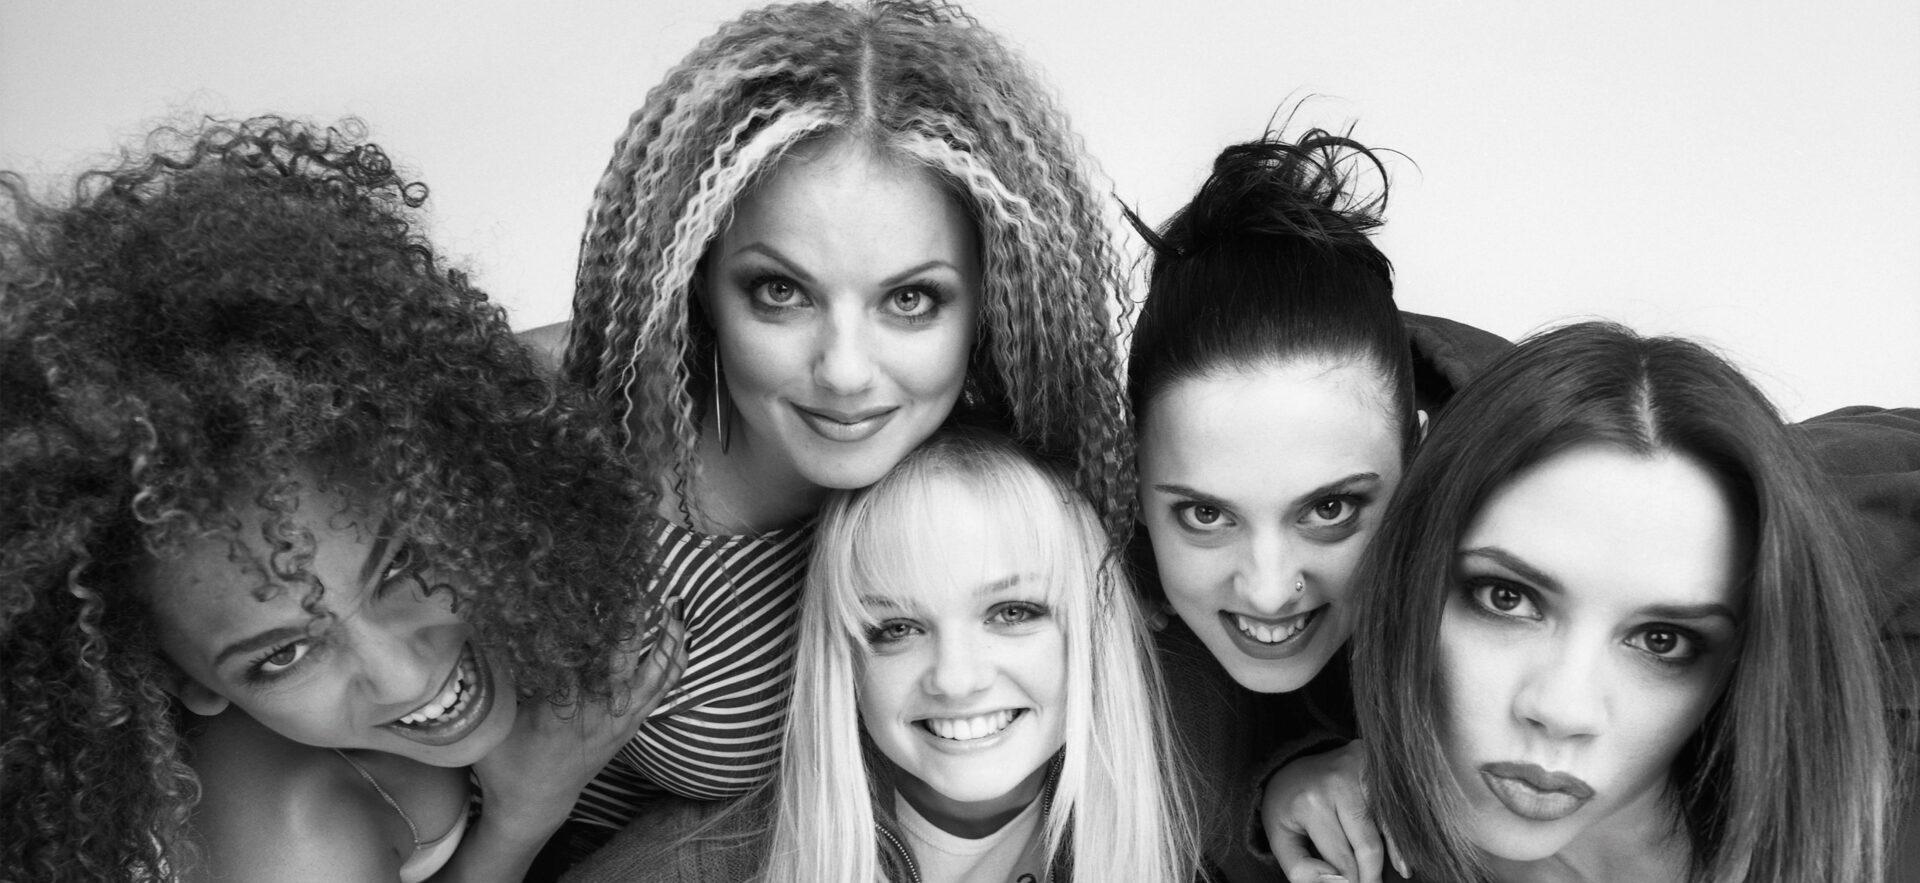 Geri Halliwell Left The Spice Girls 25 Years Ago Today: A Look Back